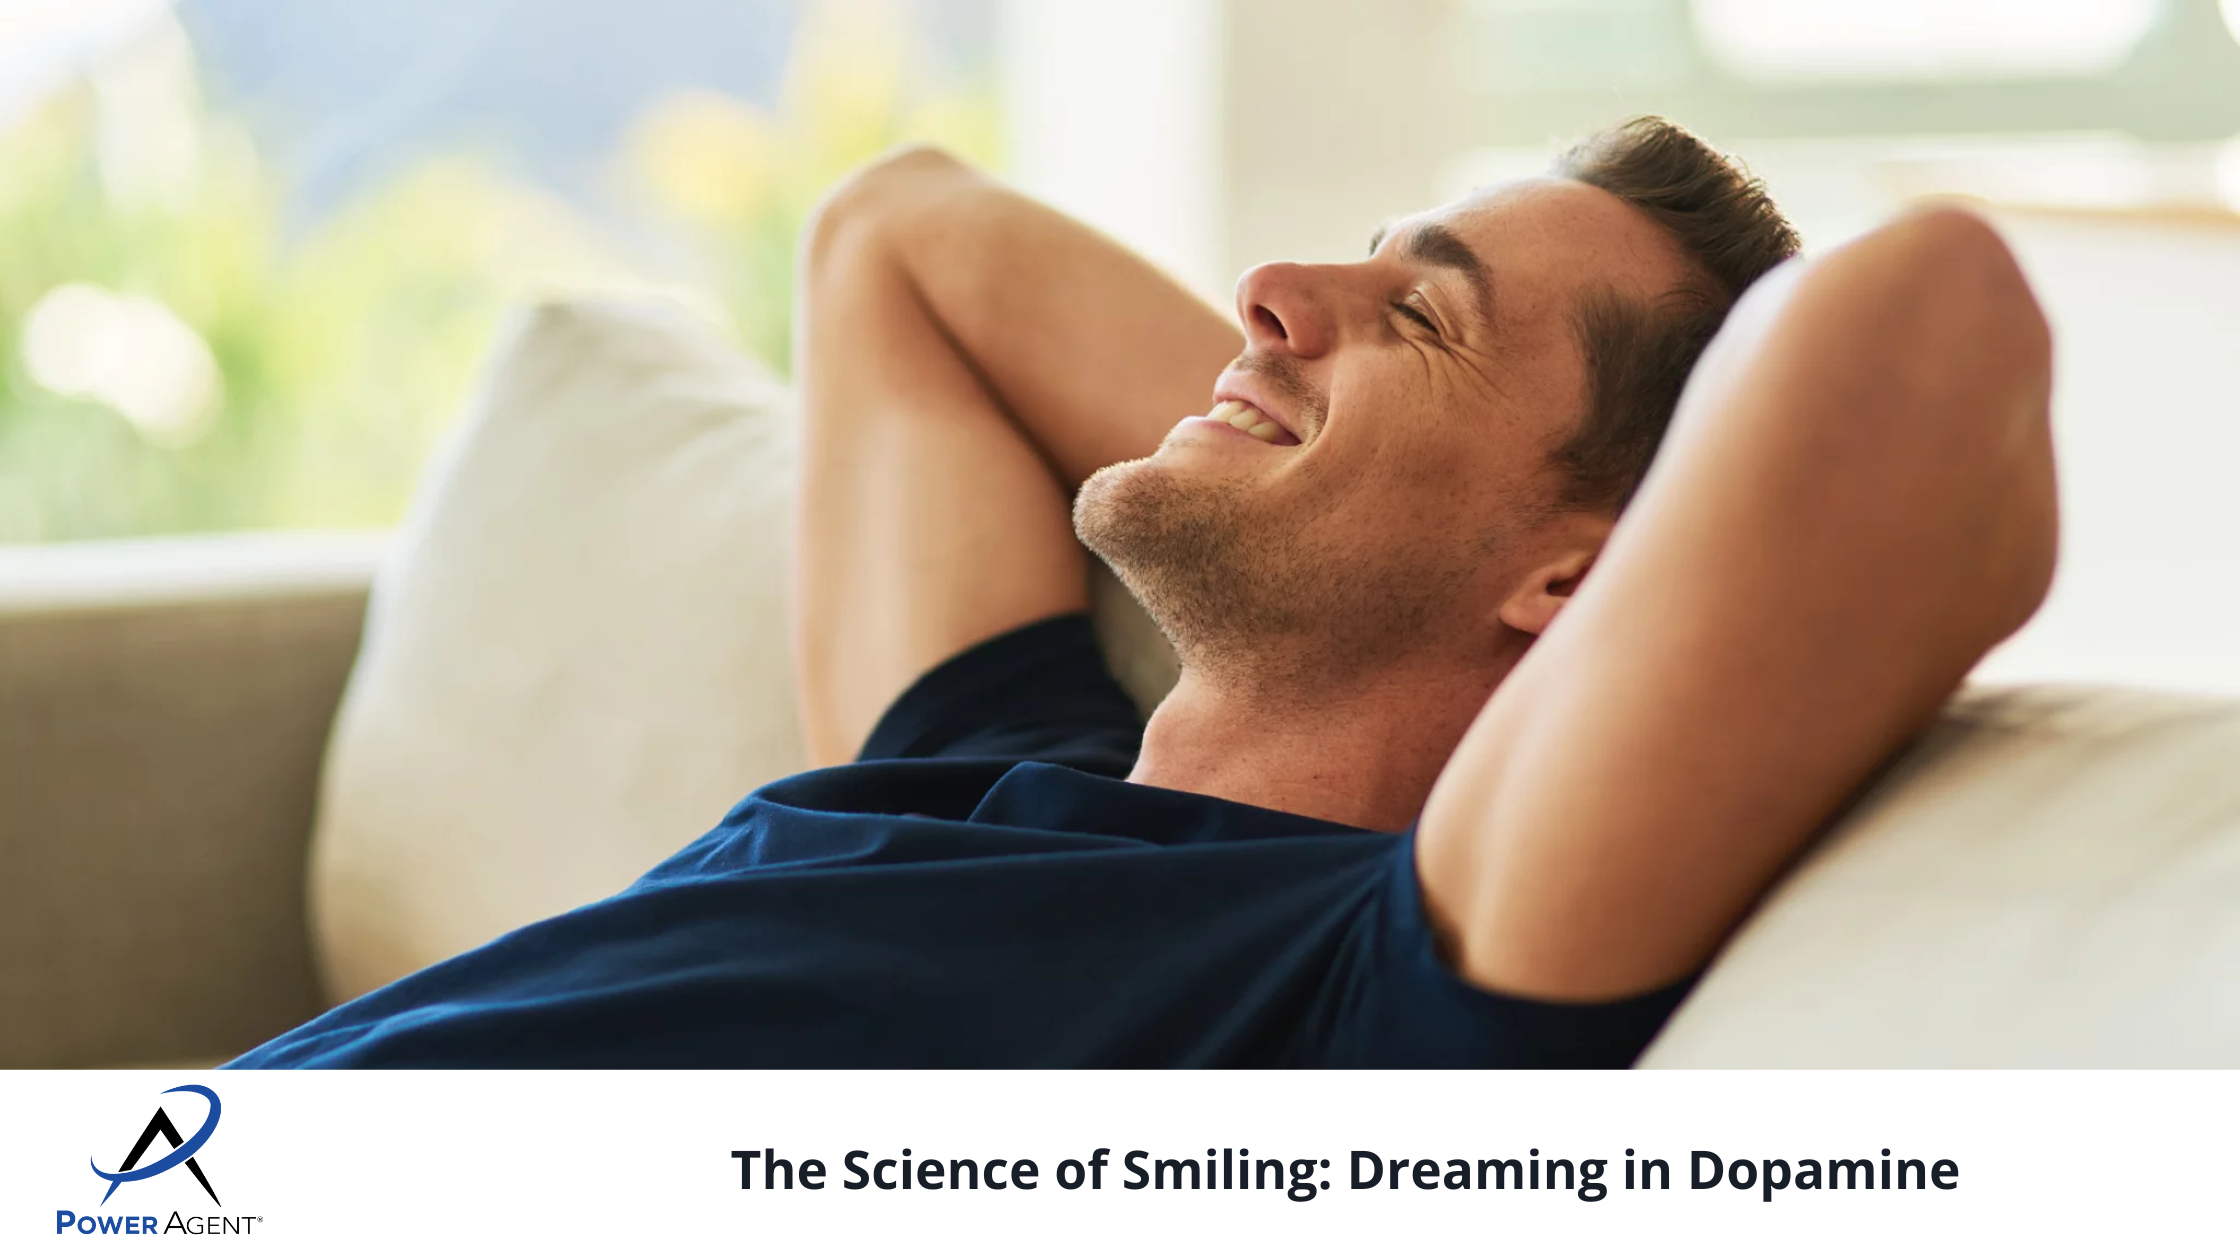 The Science of Smiling: Dreaming in Dopamine